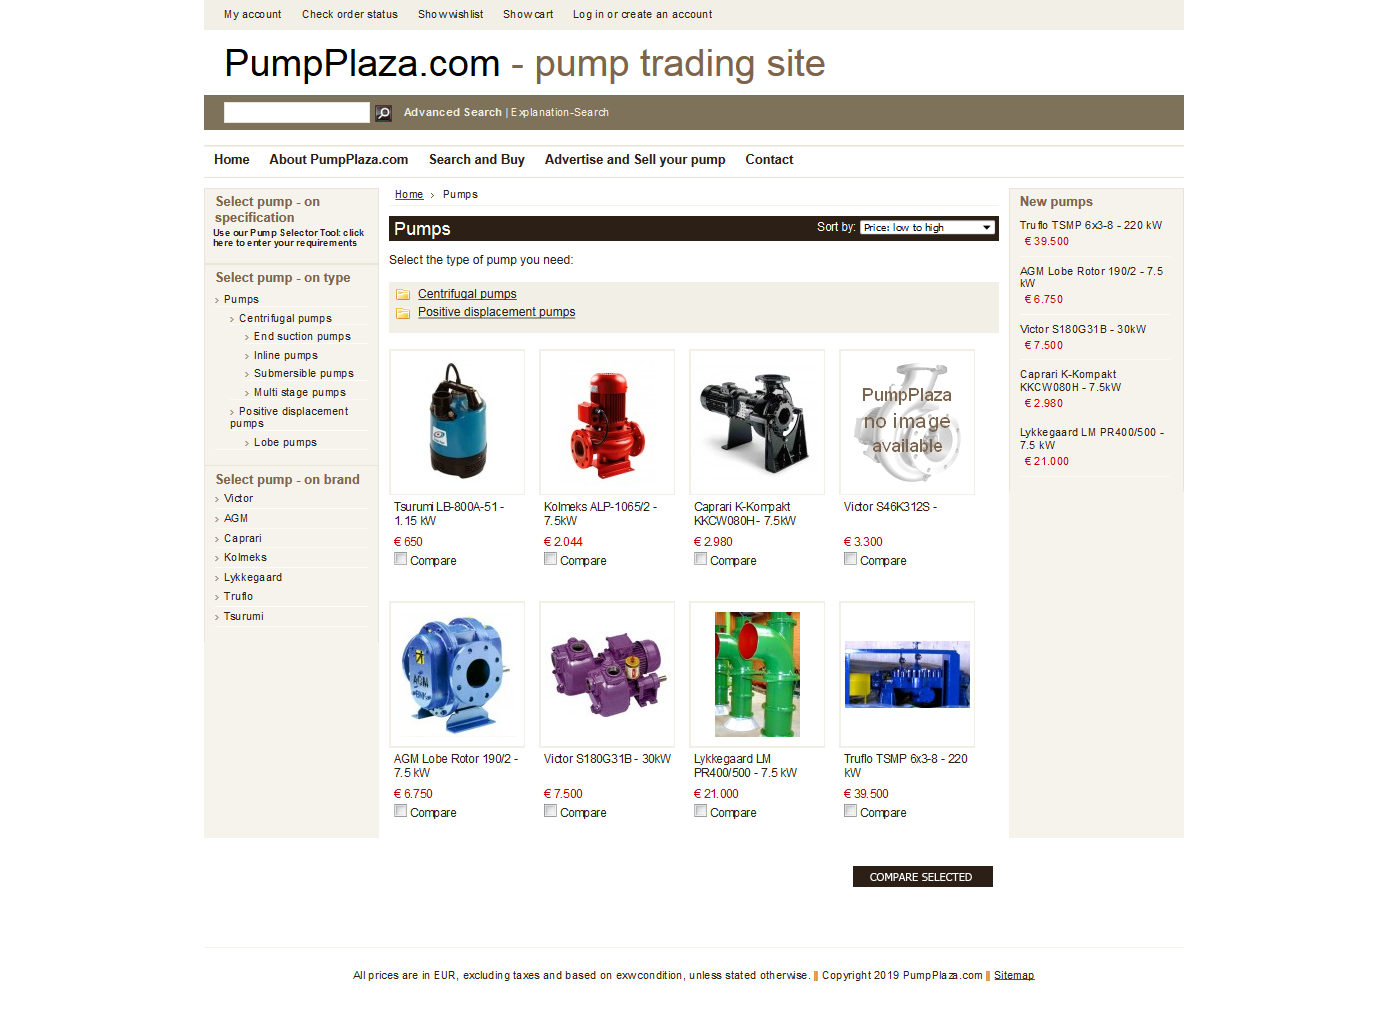 March 2019 - Website pumpplaza ended its services.